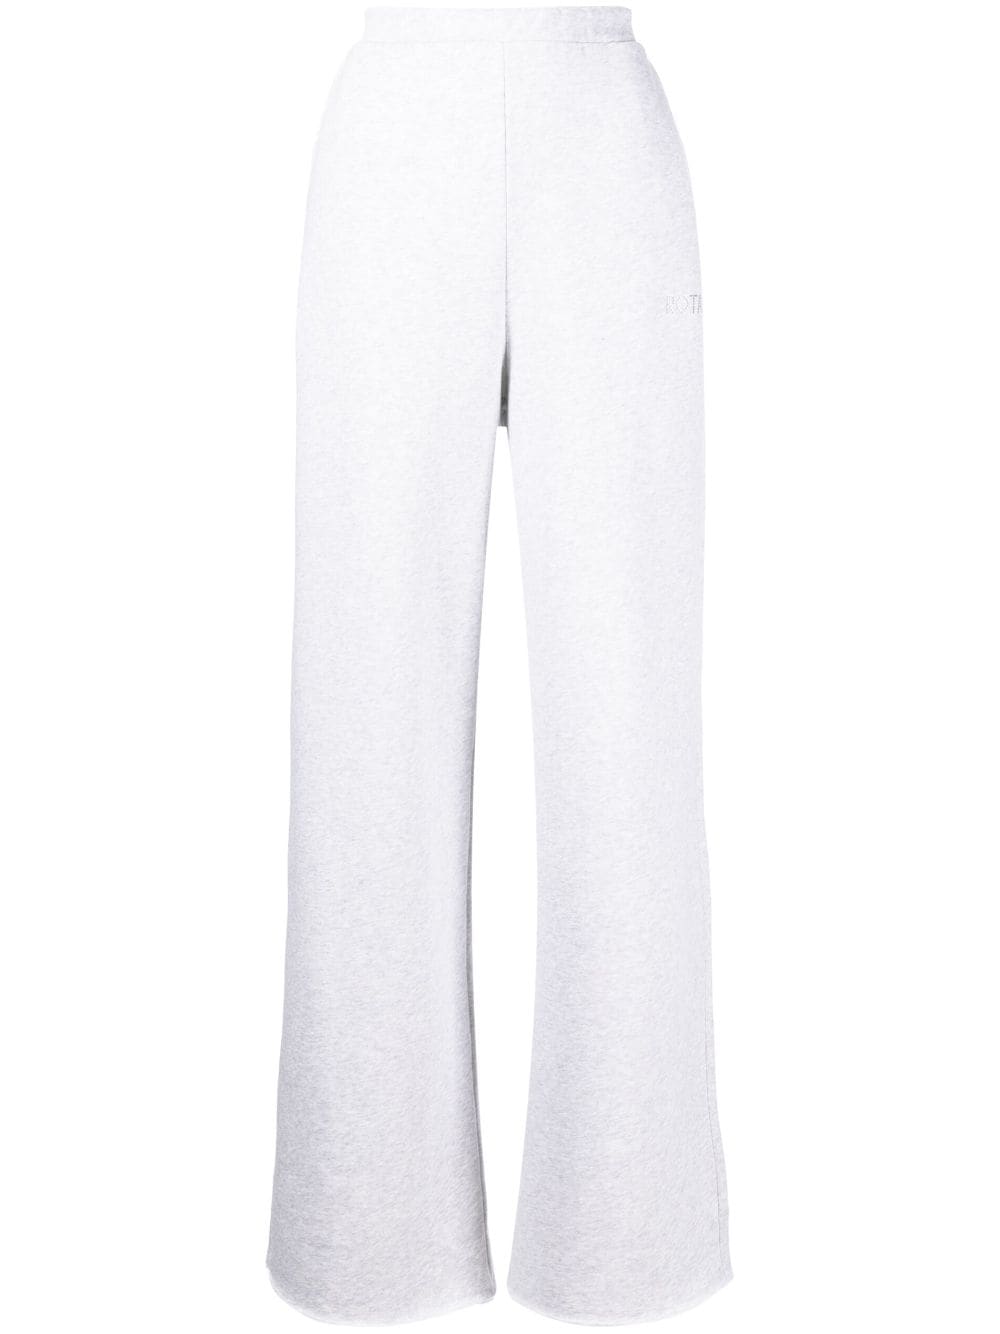 ROTATE logo-embellished cotton track pants - Grey von ROTATE